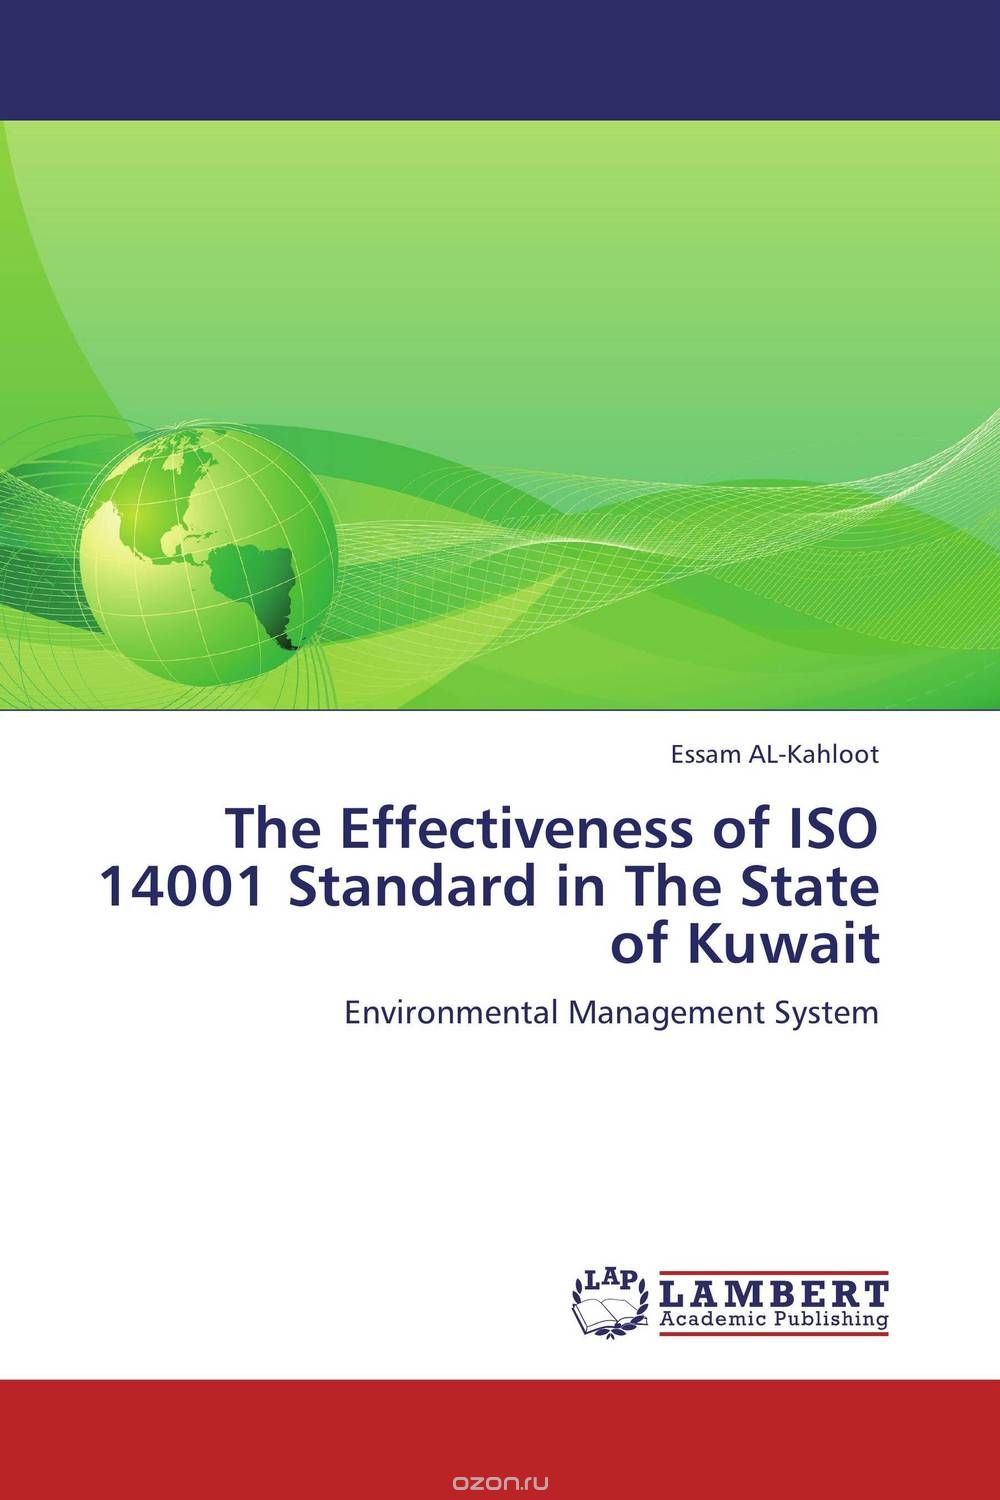 The Effectiveness of ISO 14001 Standard in The State of Kuwait